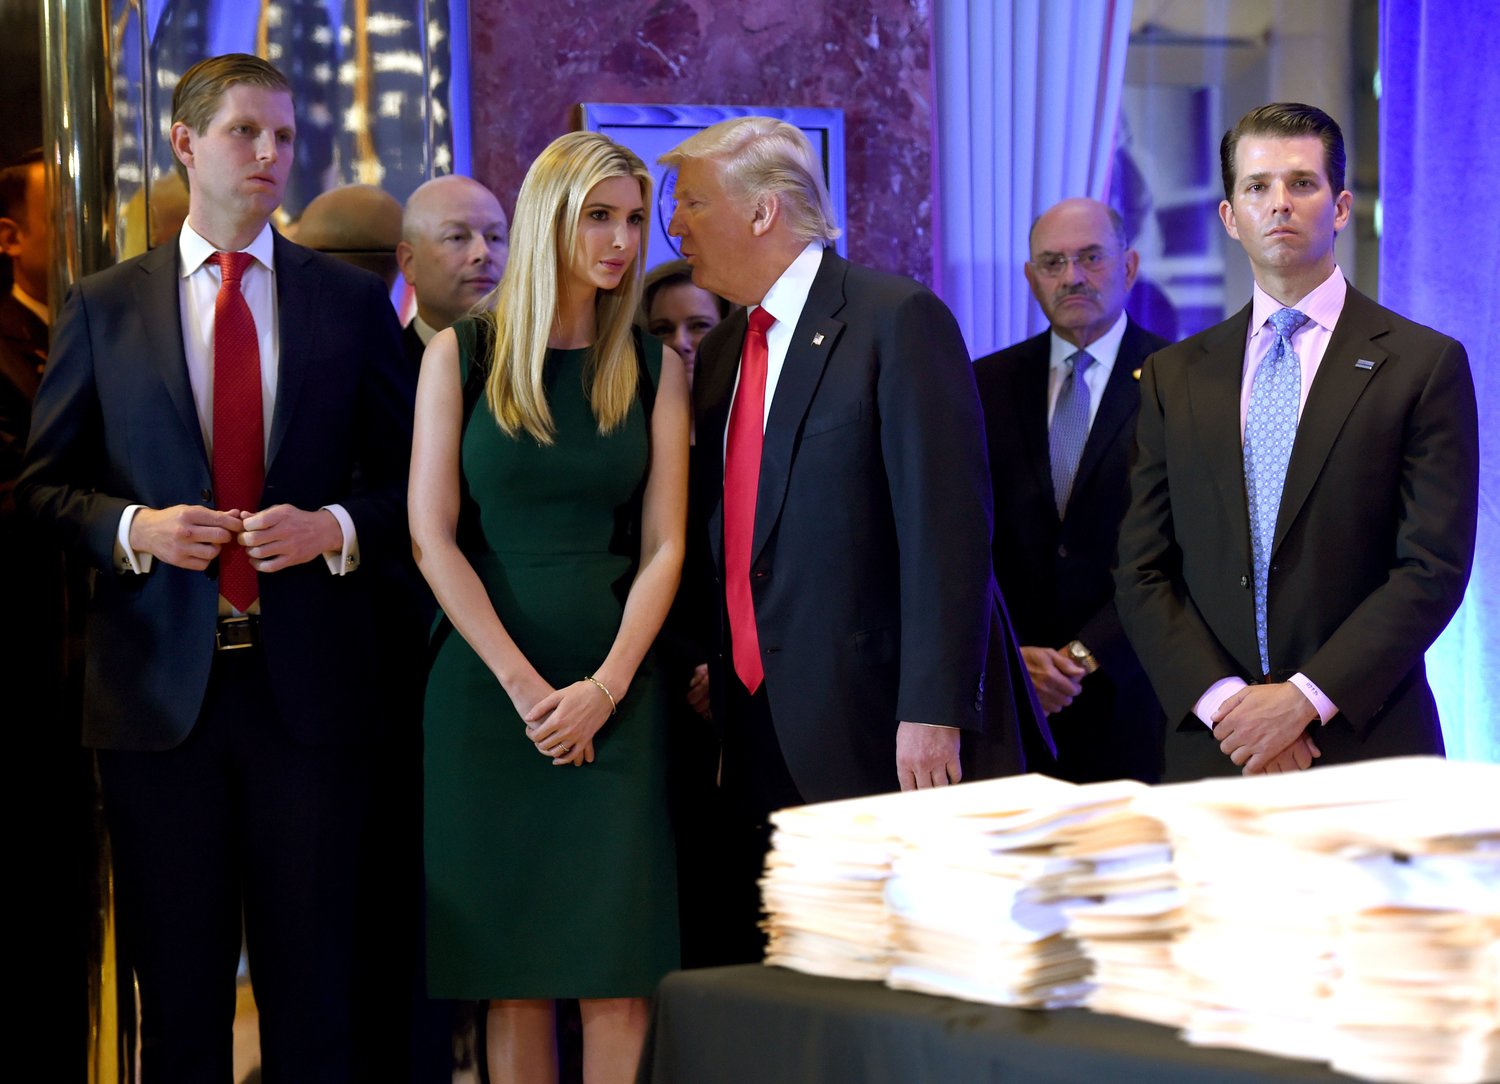 In this file photo from Jan. 11, 2017, Donald Trump along with his children Eric, left, Ivanka and Donald Jr. arrive for a news conference at Trump Tower in New York. (Timothy A. Clary/AFP/Getty Images/TNS)